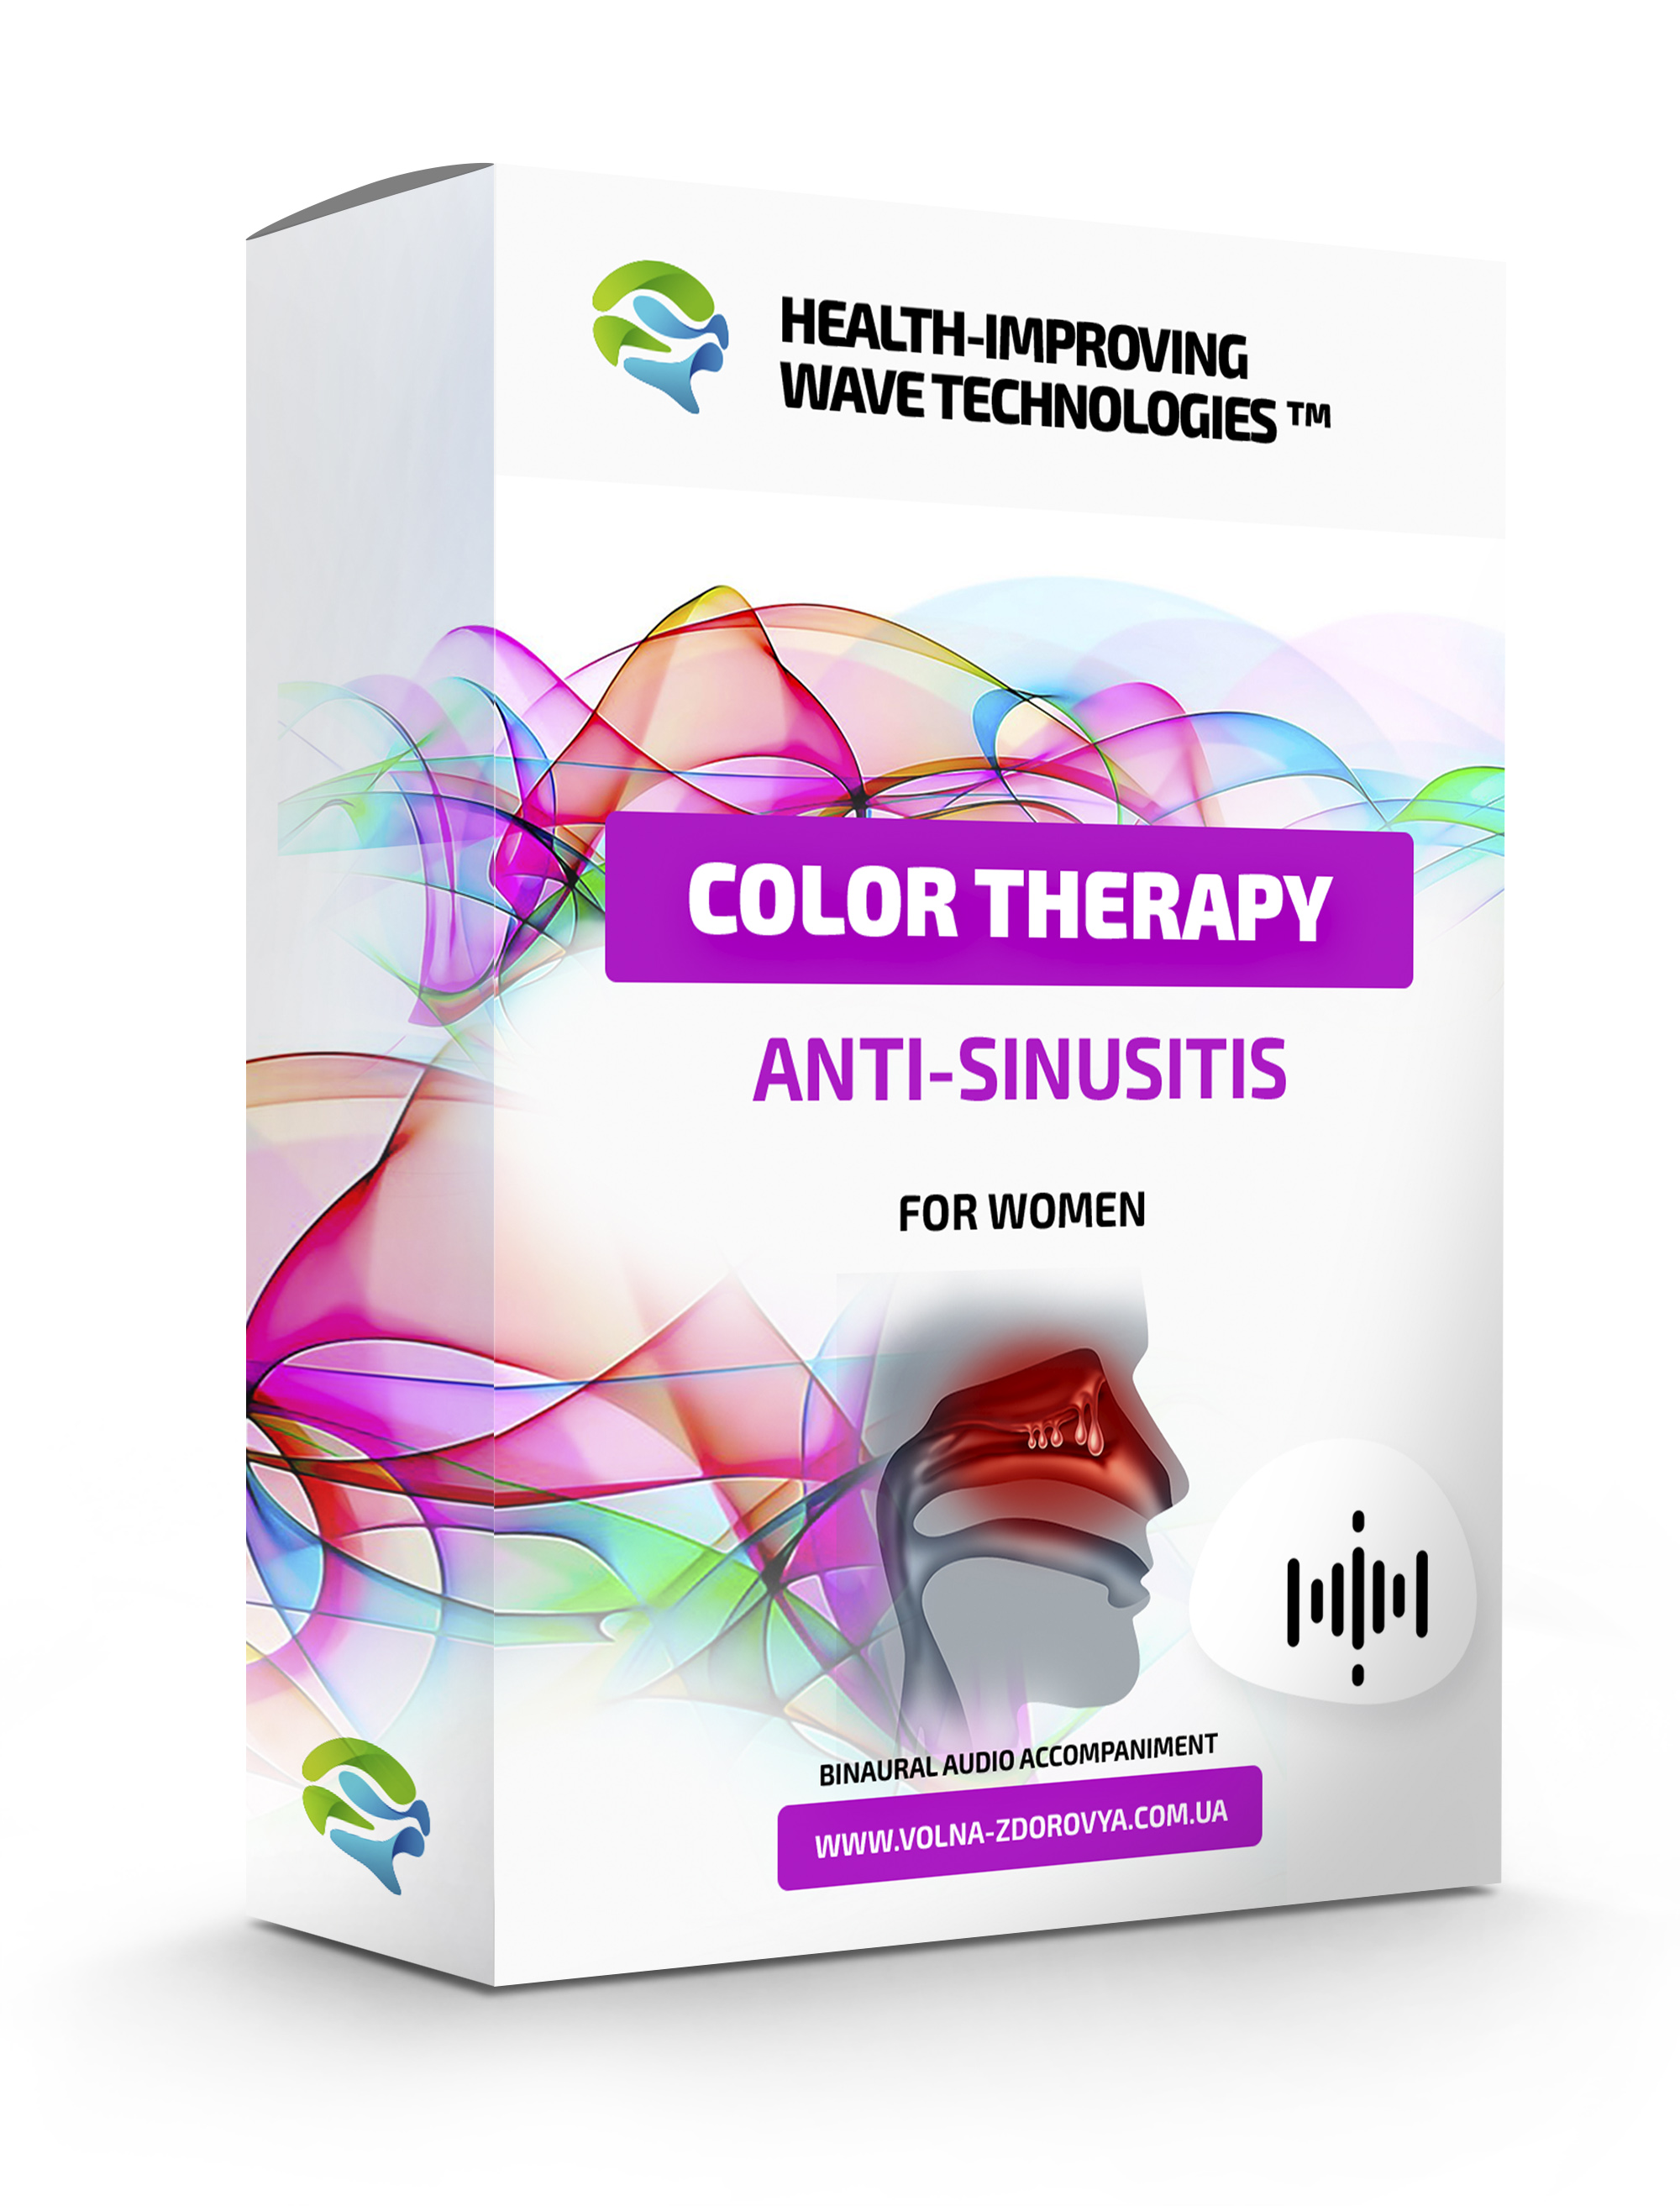 Сolor therapy - Anti-Sinusitis. For women